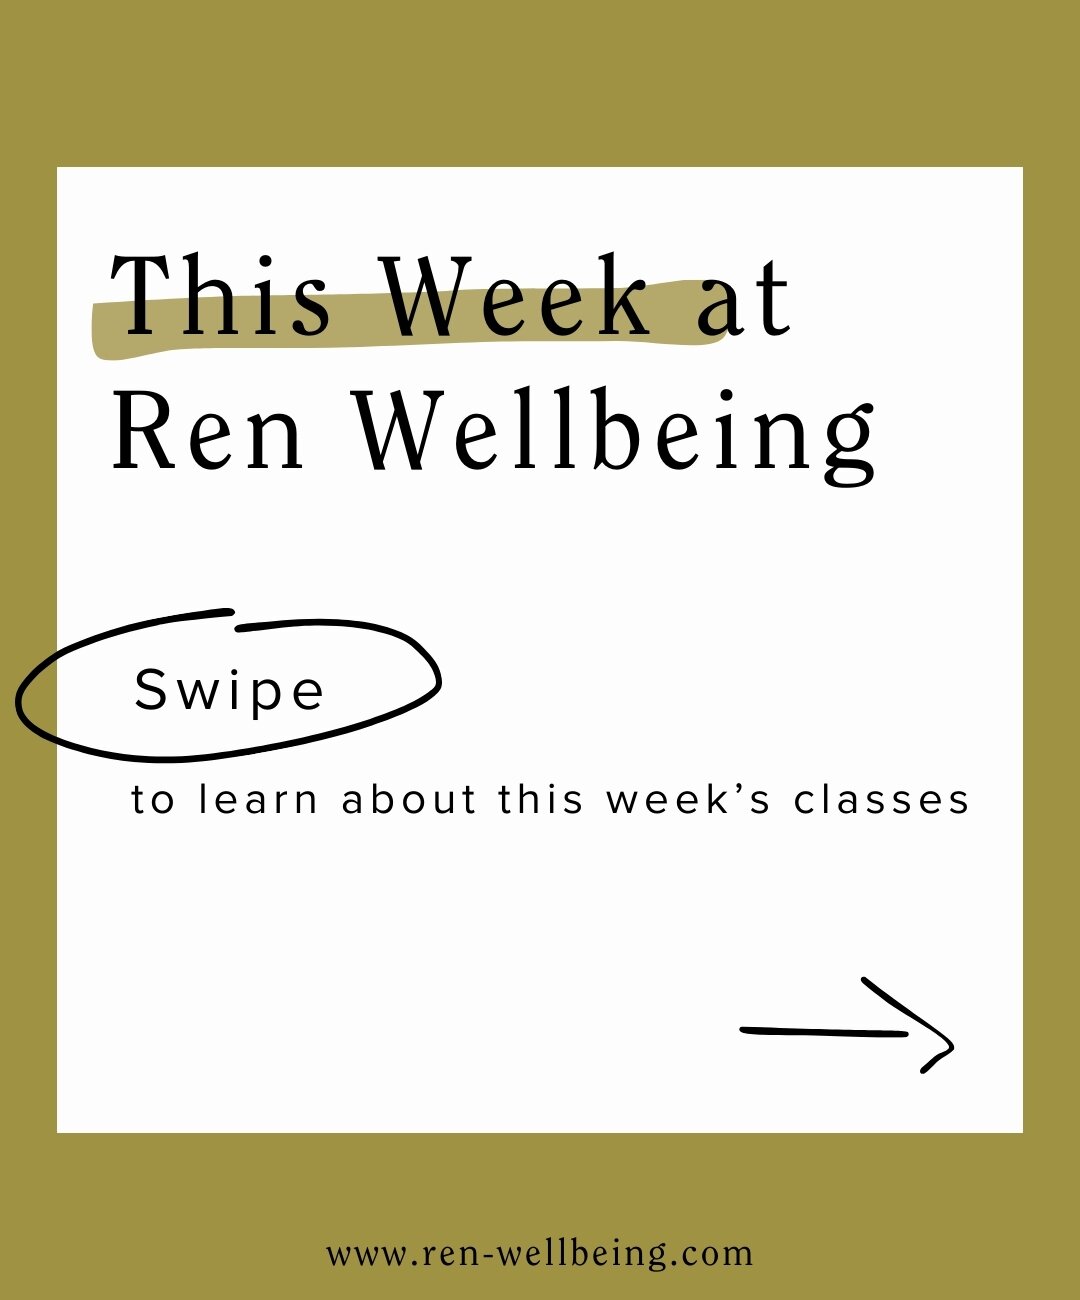 Ren Wellbeing - your virtual wellness center.⁣⁣ We offer a variety of virtual sessions each week, with practitioners from all over the world.⁣⁣

Check out our monthly schedule to see the types of modalities we offer and get to know the Ren Wellbeing 